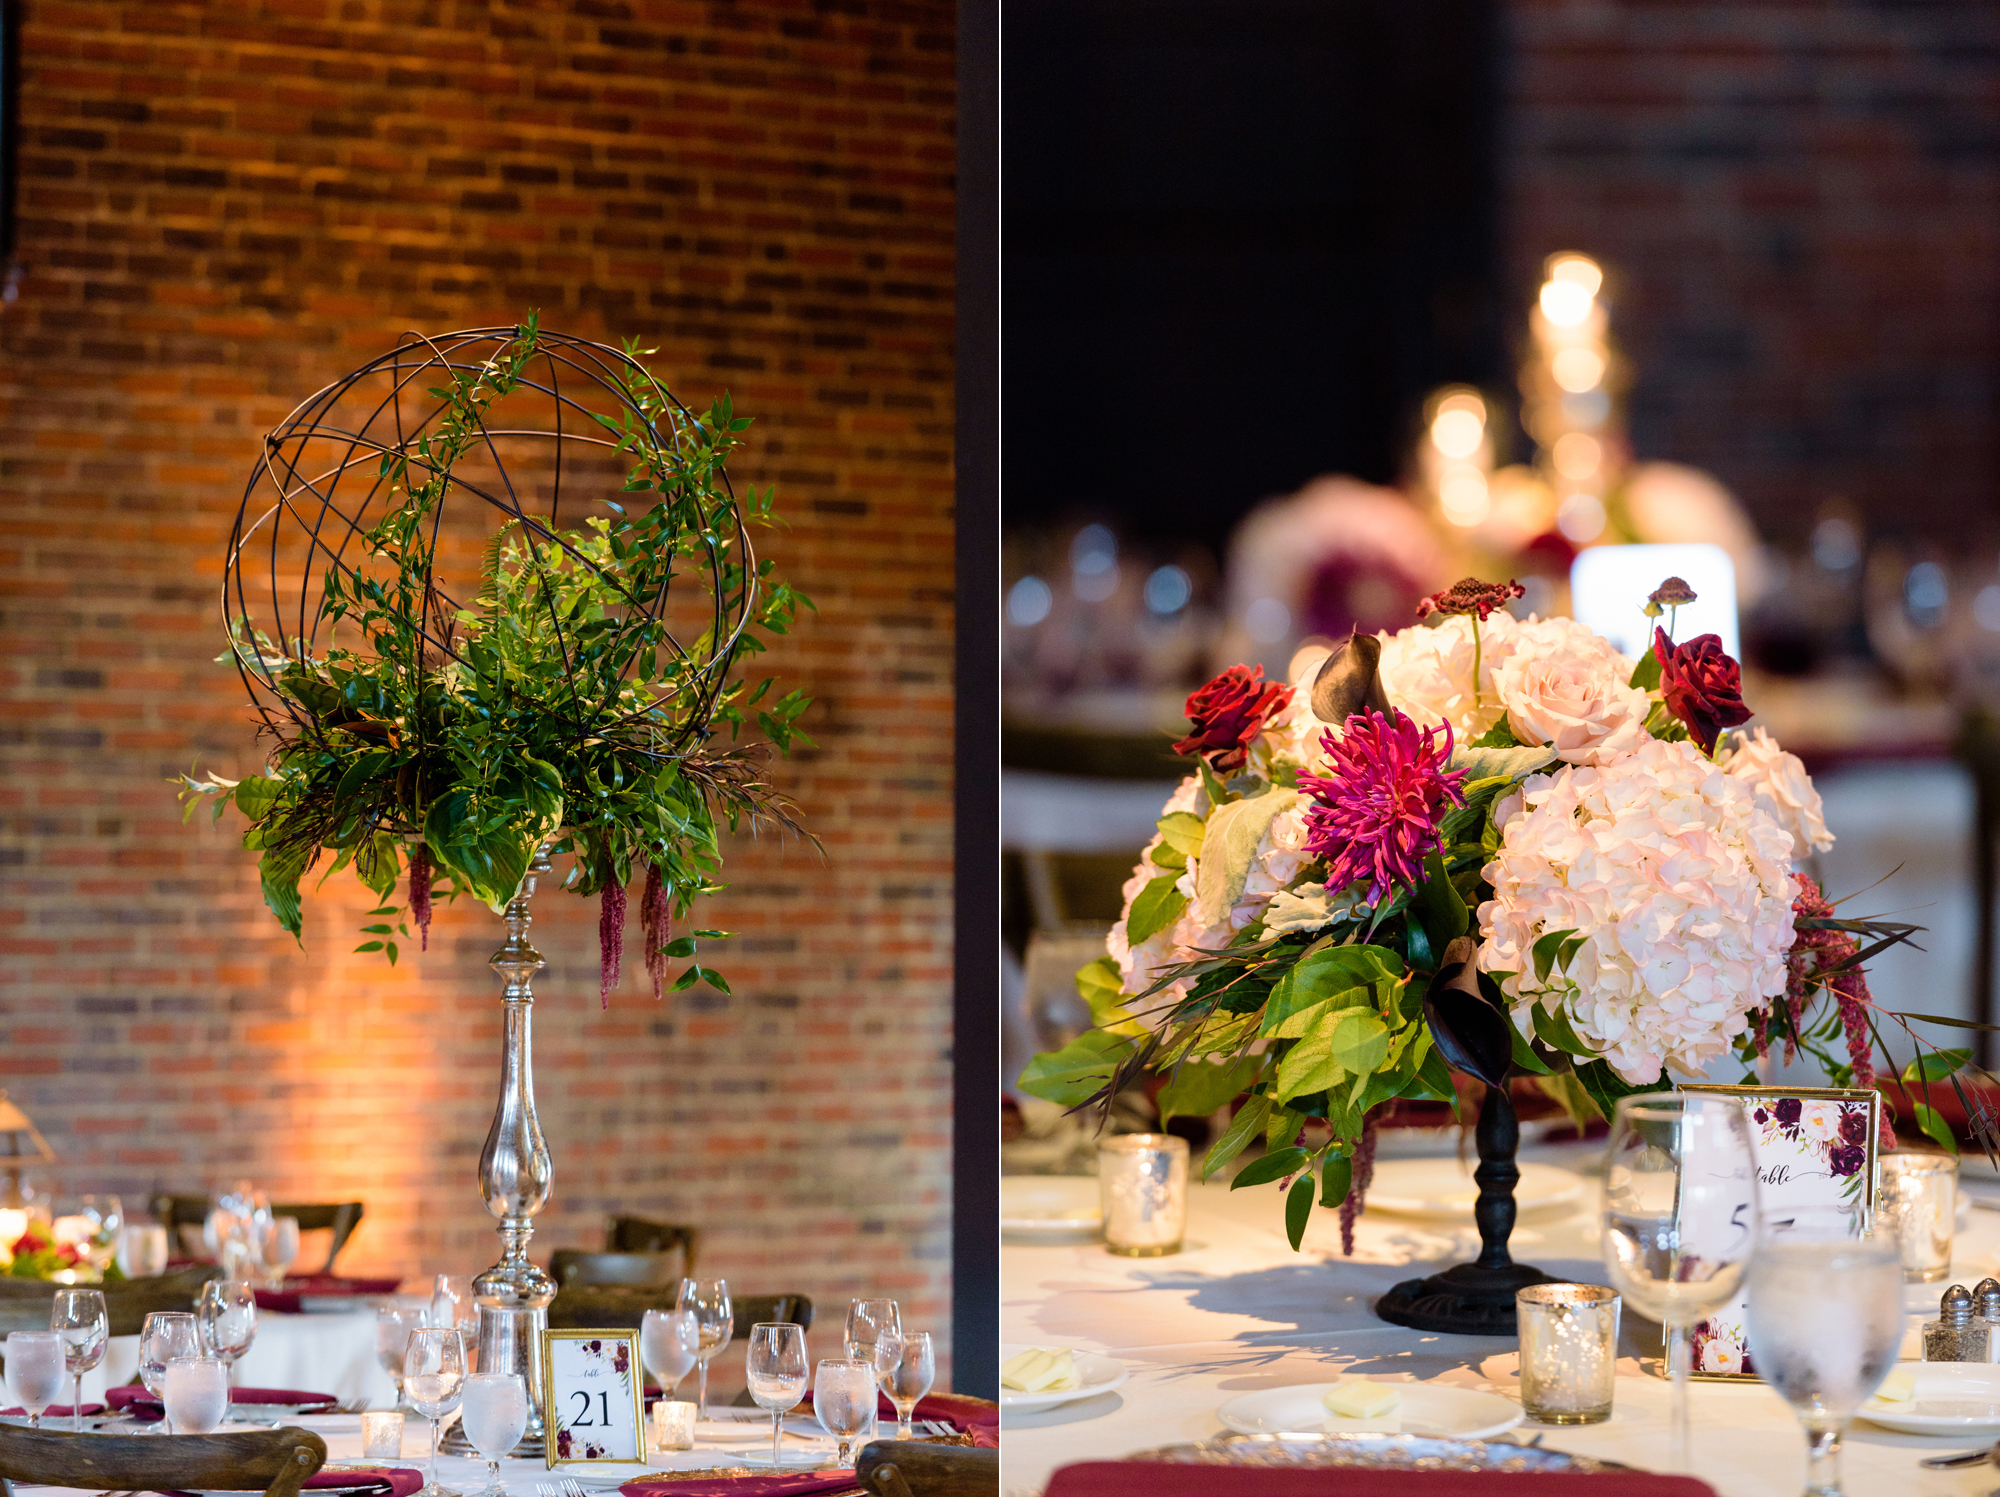 Wedding Reception details at the Armory